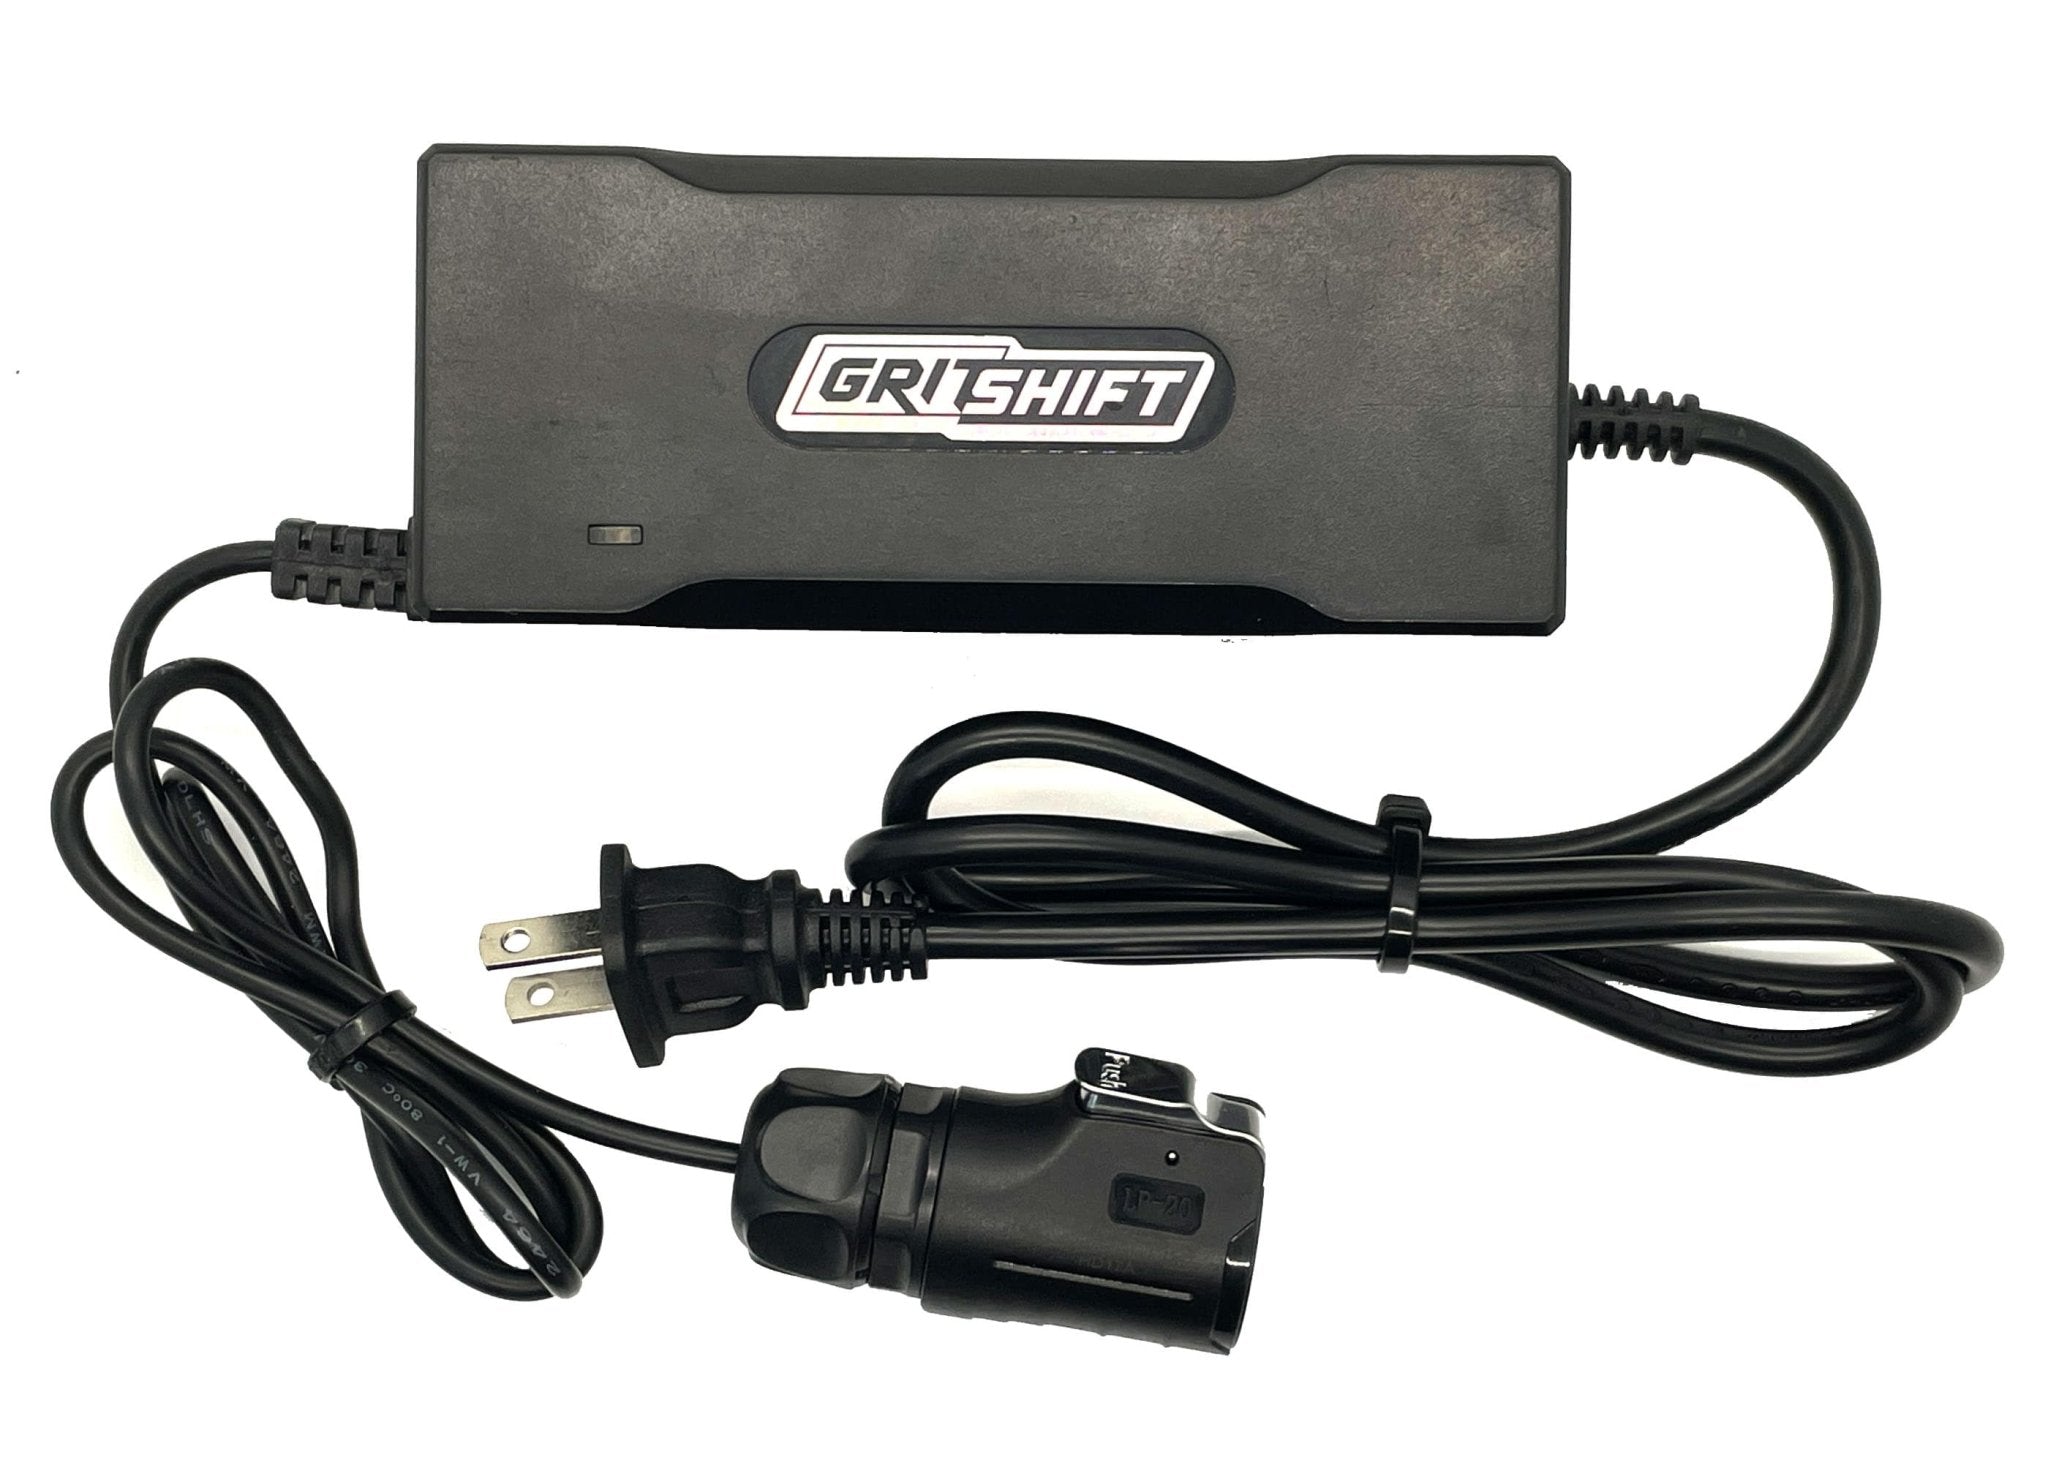 GritShift 60V 2 Amp Portable Charger - TB Electric